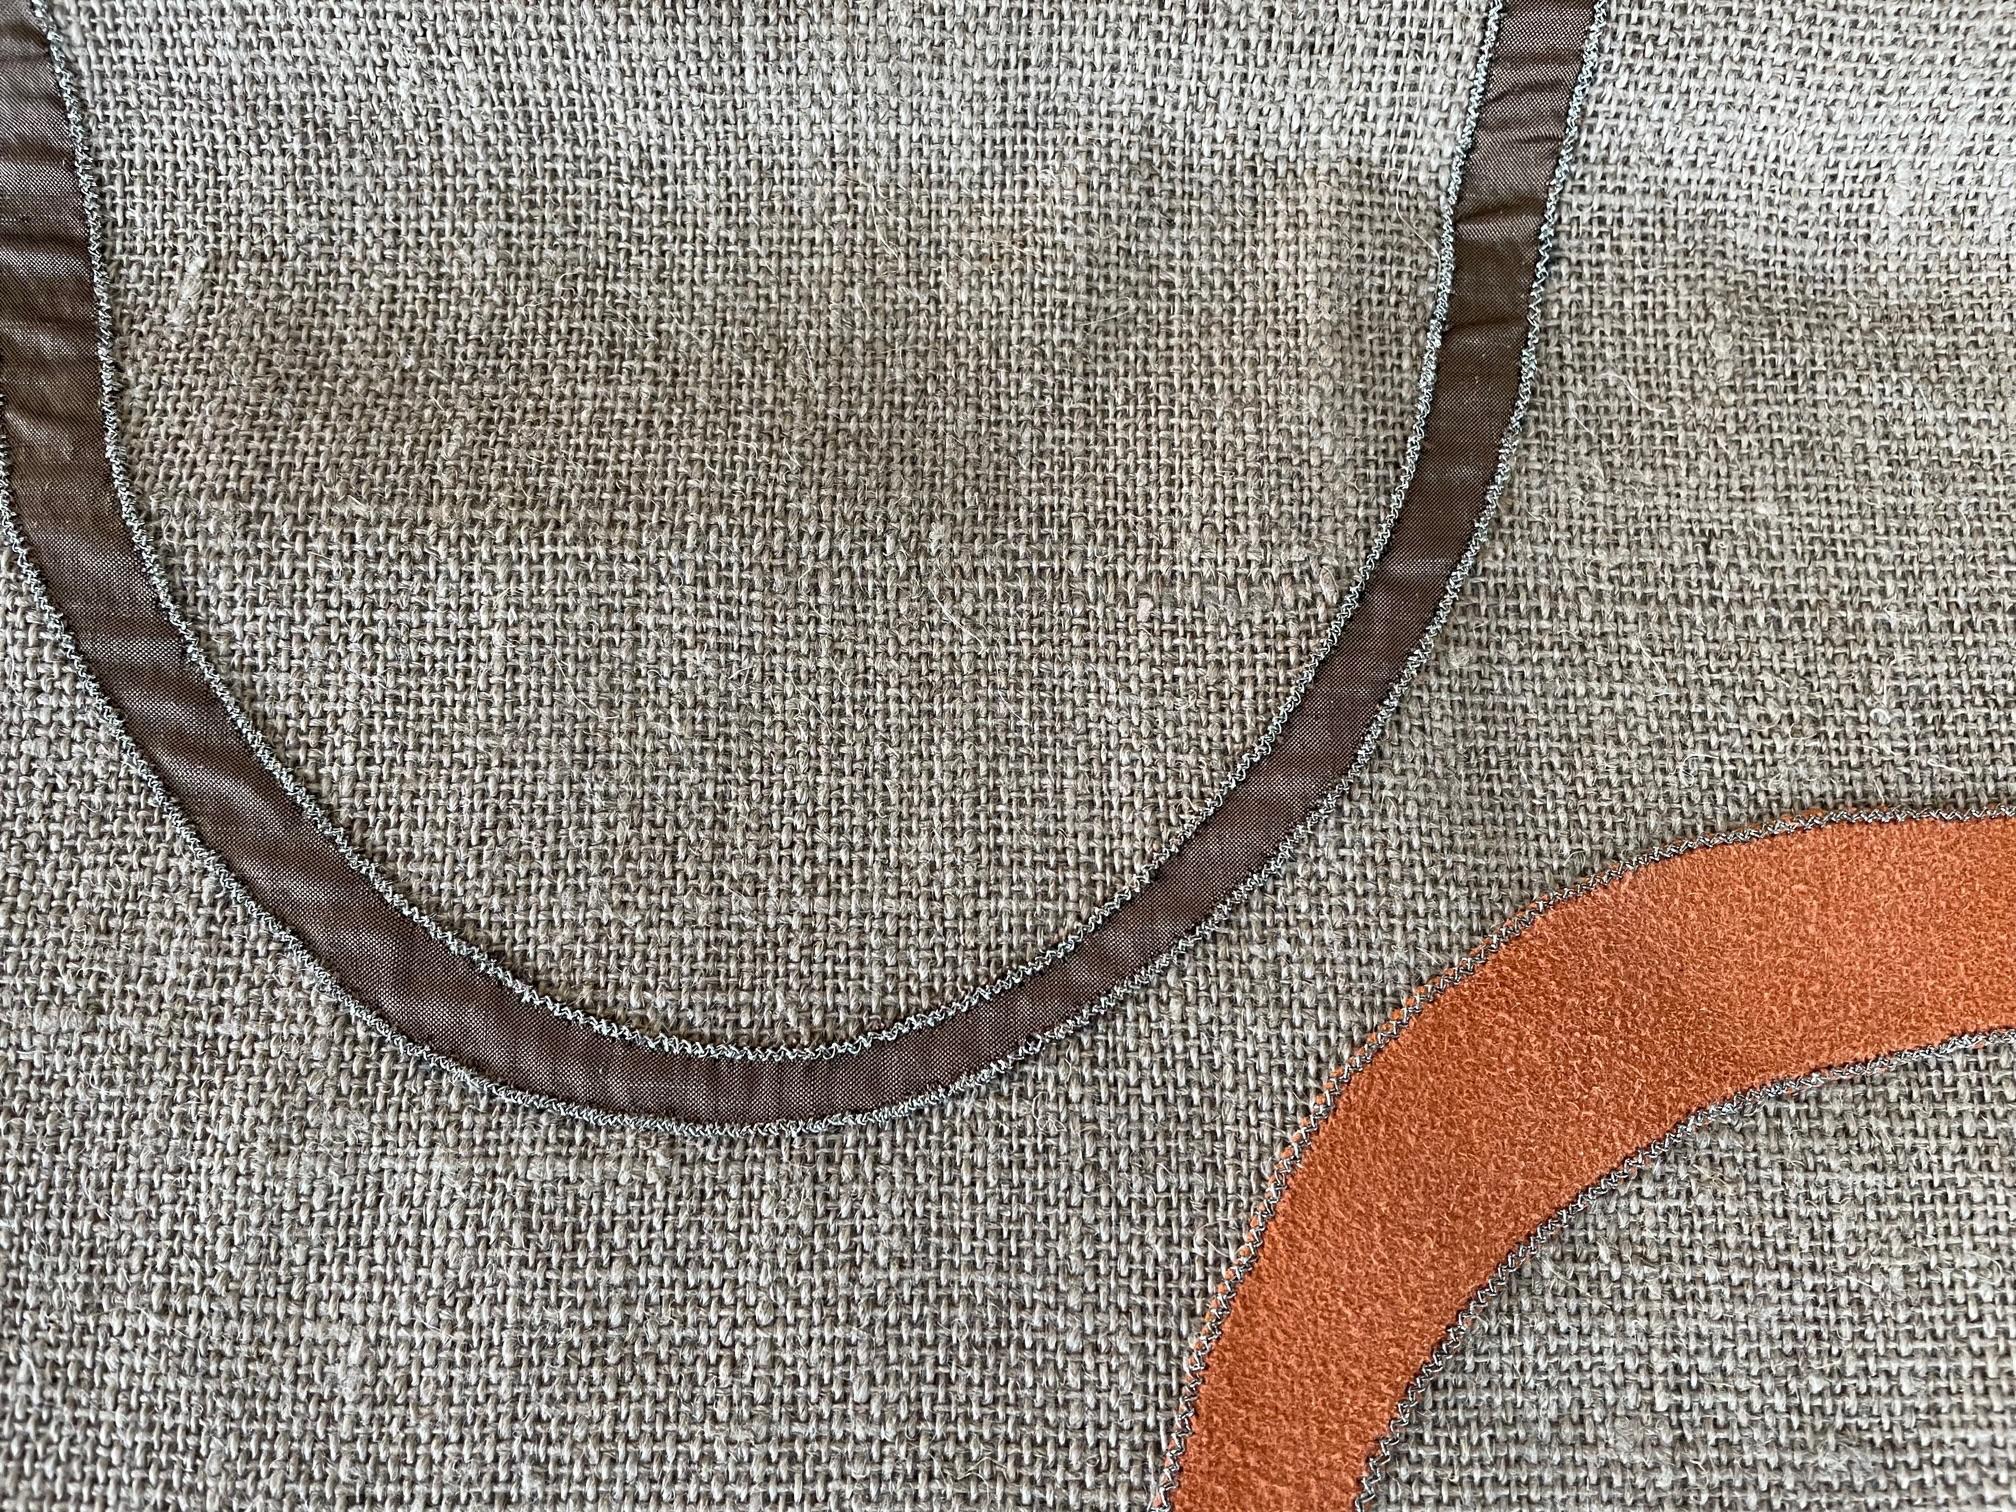 Hemp panel col. Beige : the appliqué work has been made all by hand, the contemporary design is made with silk col. Beige and brown and suede leather col. Orange, outline stitch ant. Silver,

This panel can be turned in to cushions or a